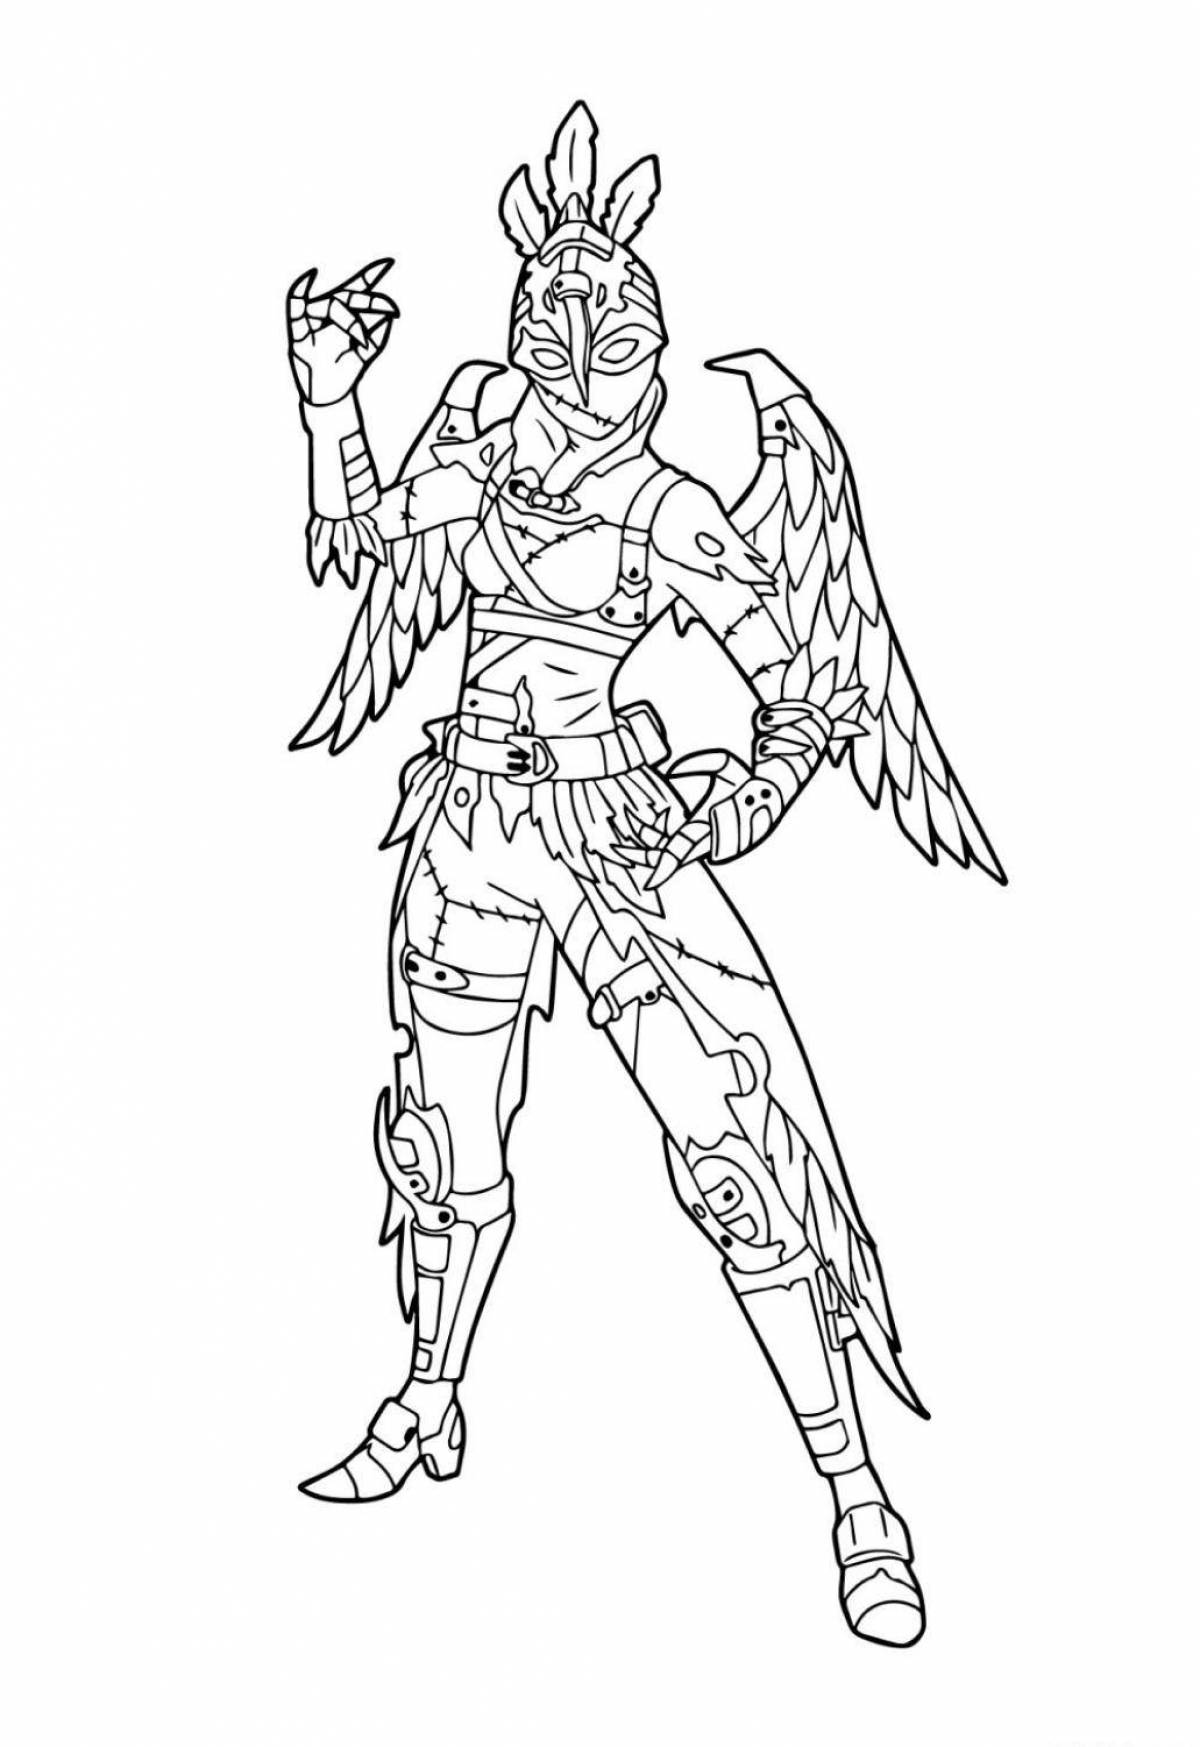 Fortnite glowing coloring page